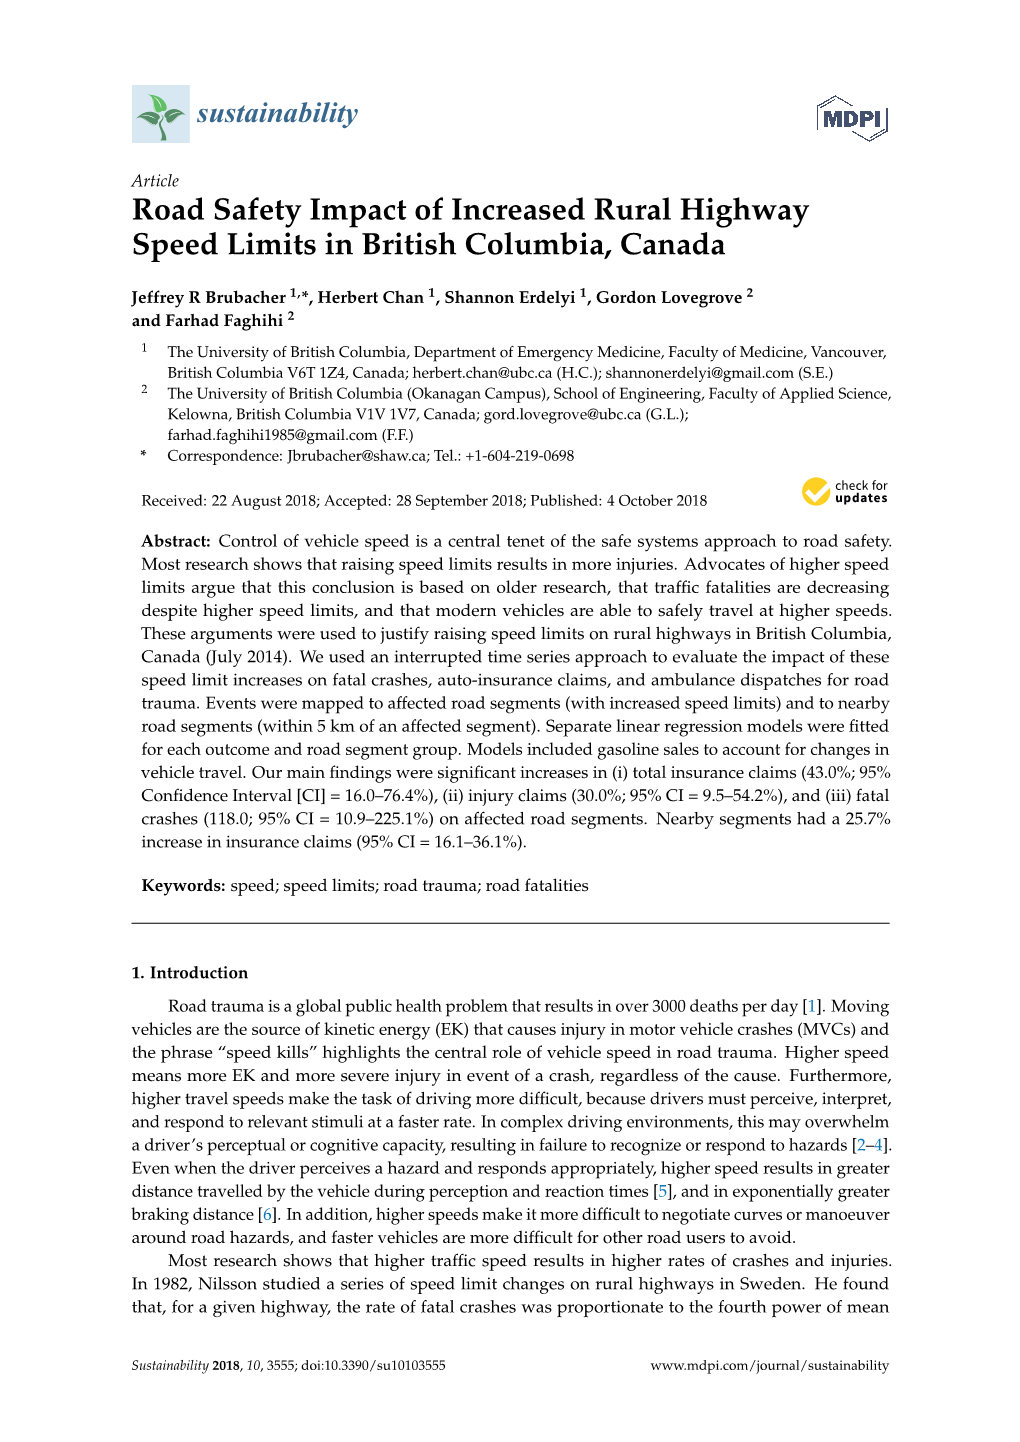 Road Safety Impact of Increased Rural Highway Speed Limits in British Columbia, Canada